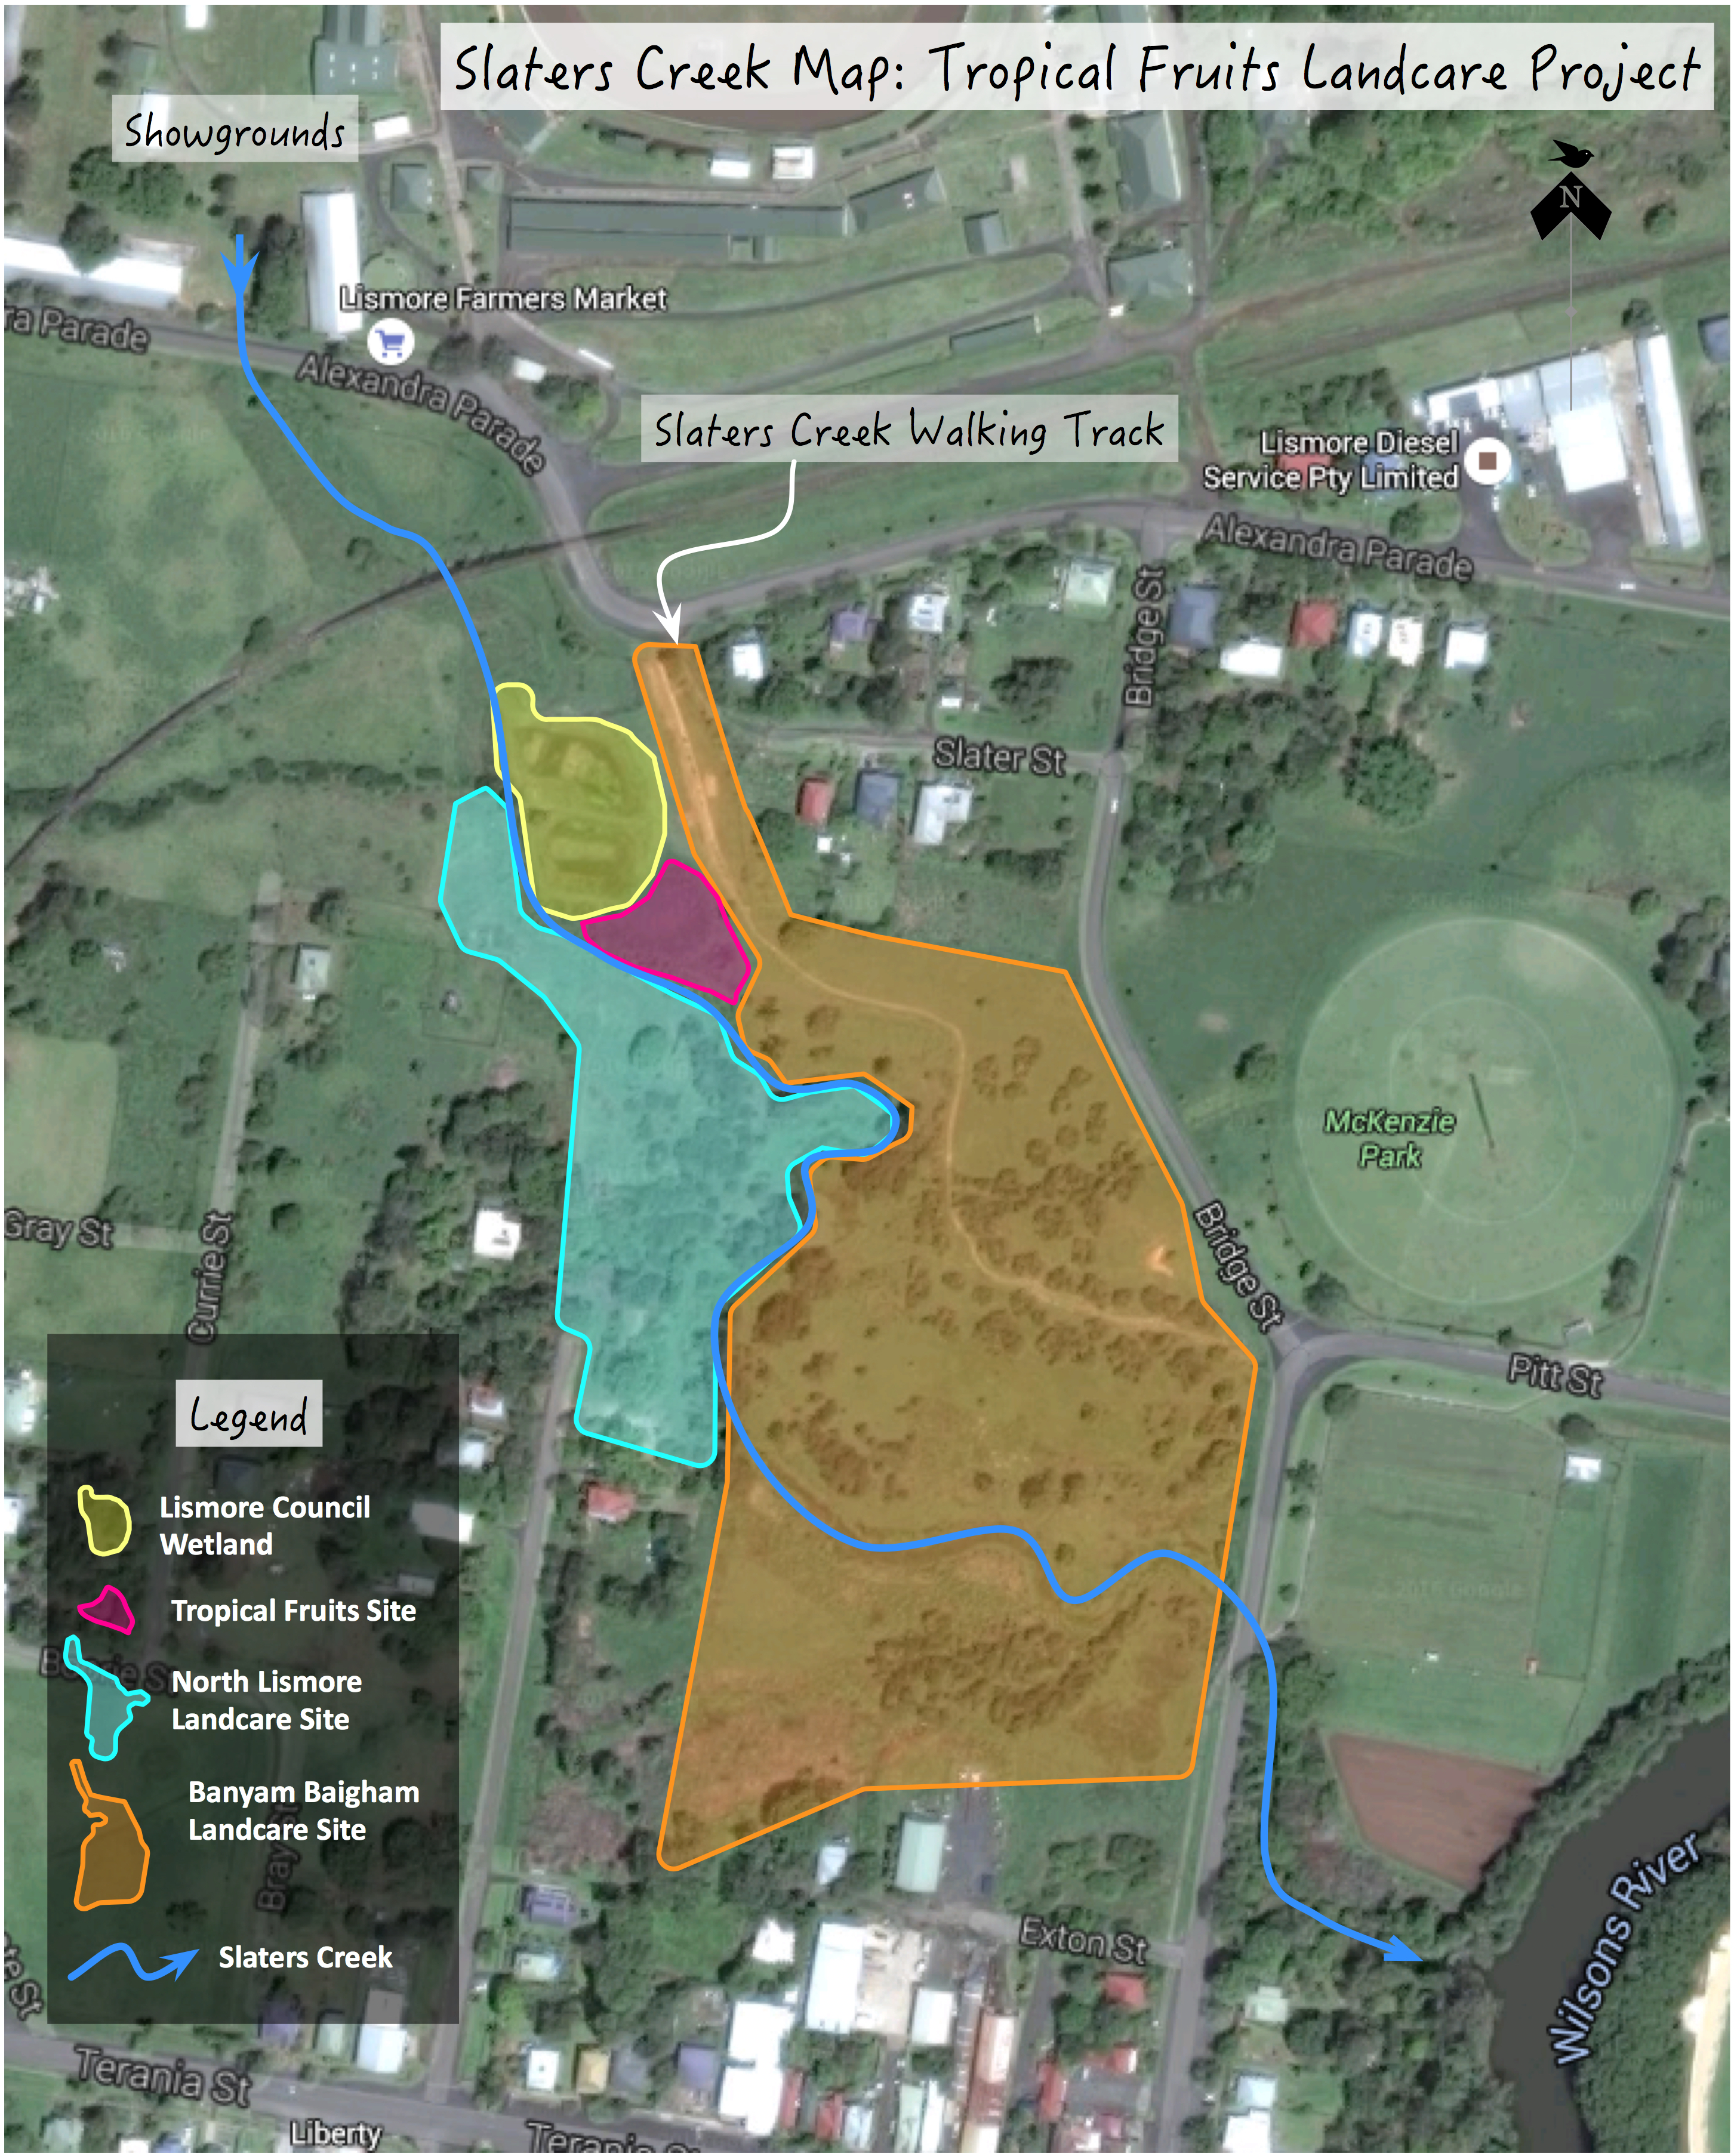 Site Map for the Slaters Creek Project